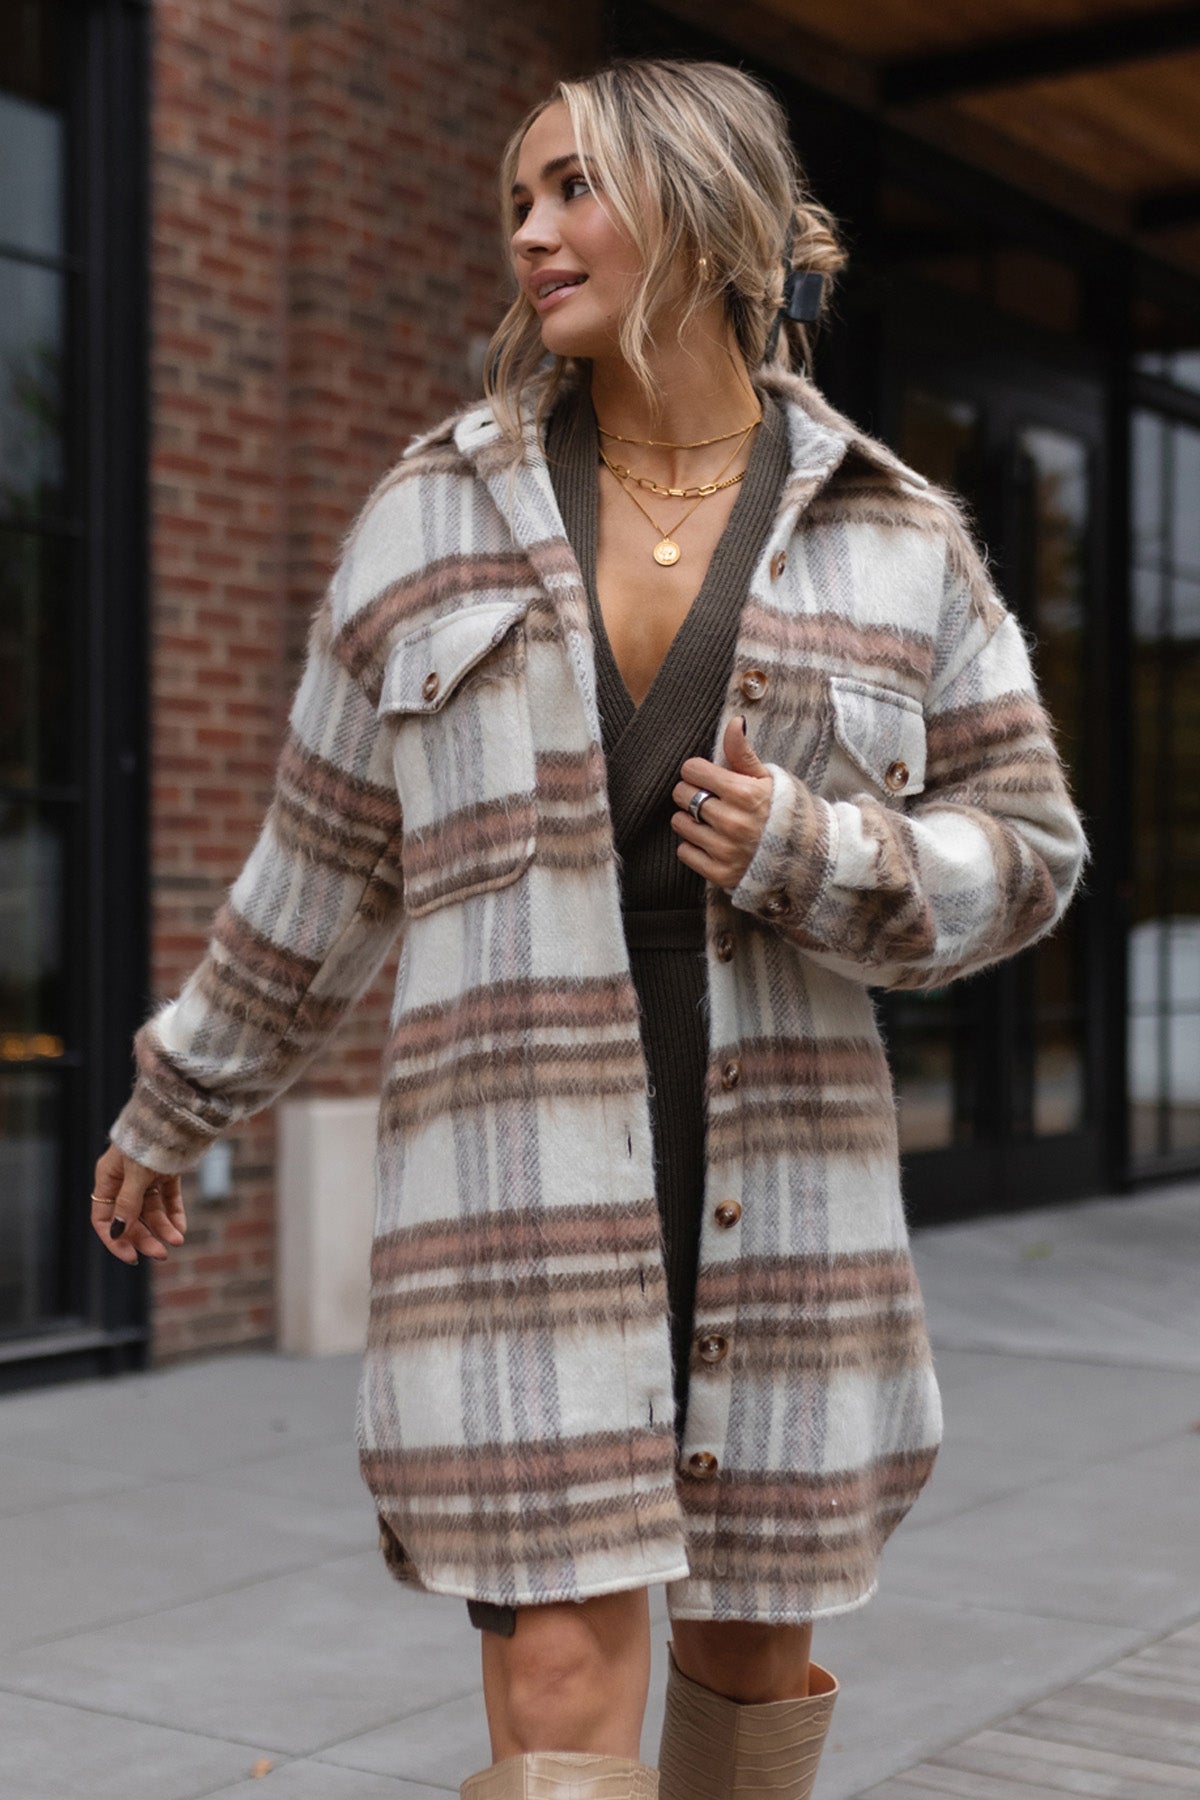 OUT WEST BROWN AND CREAM PLAID SHACKET